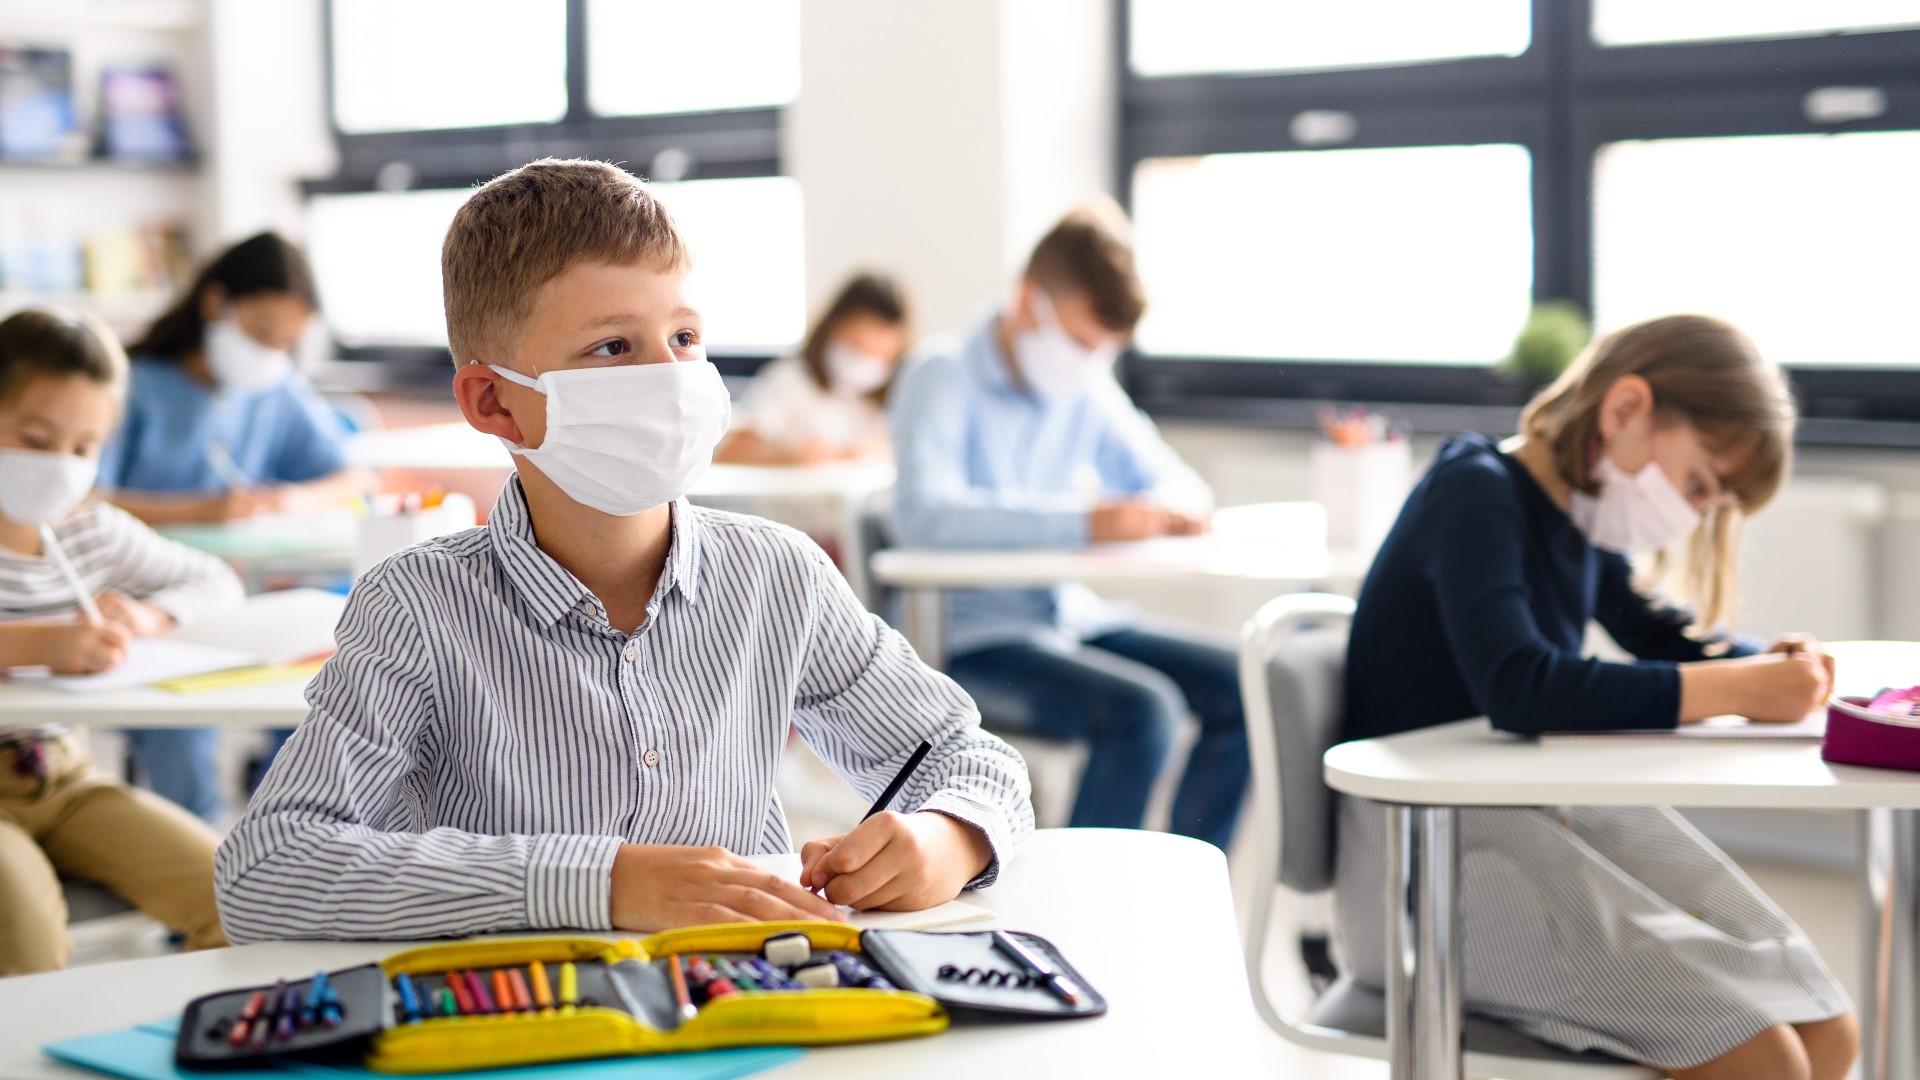 Schools districts across the Carolinas are taking different approaches to COVID-19 protocols, with some districts dropping their mask requirements for students.